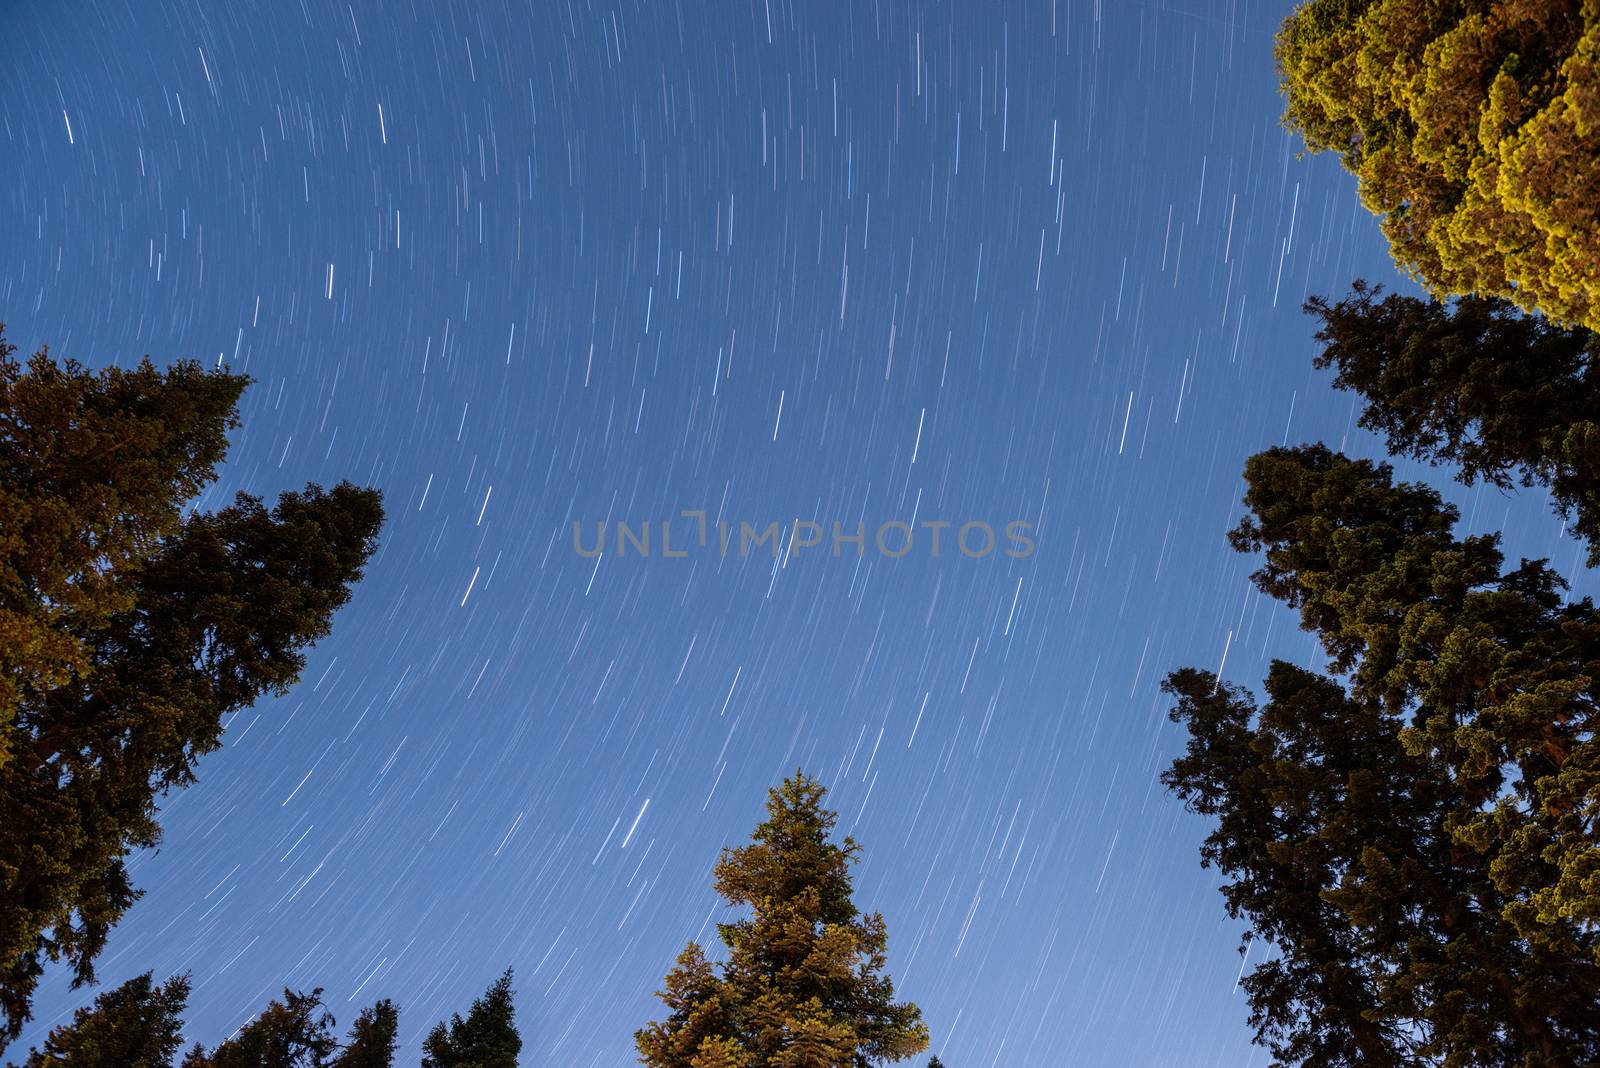 Star trails in Dorst Creek campground in Sequoia National Park, California by Njean